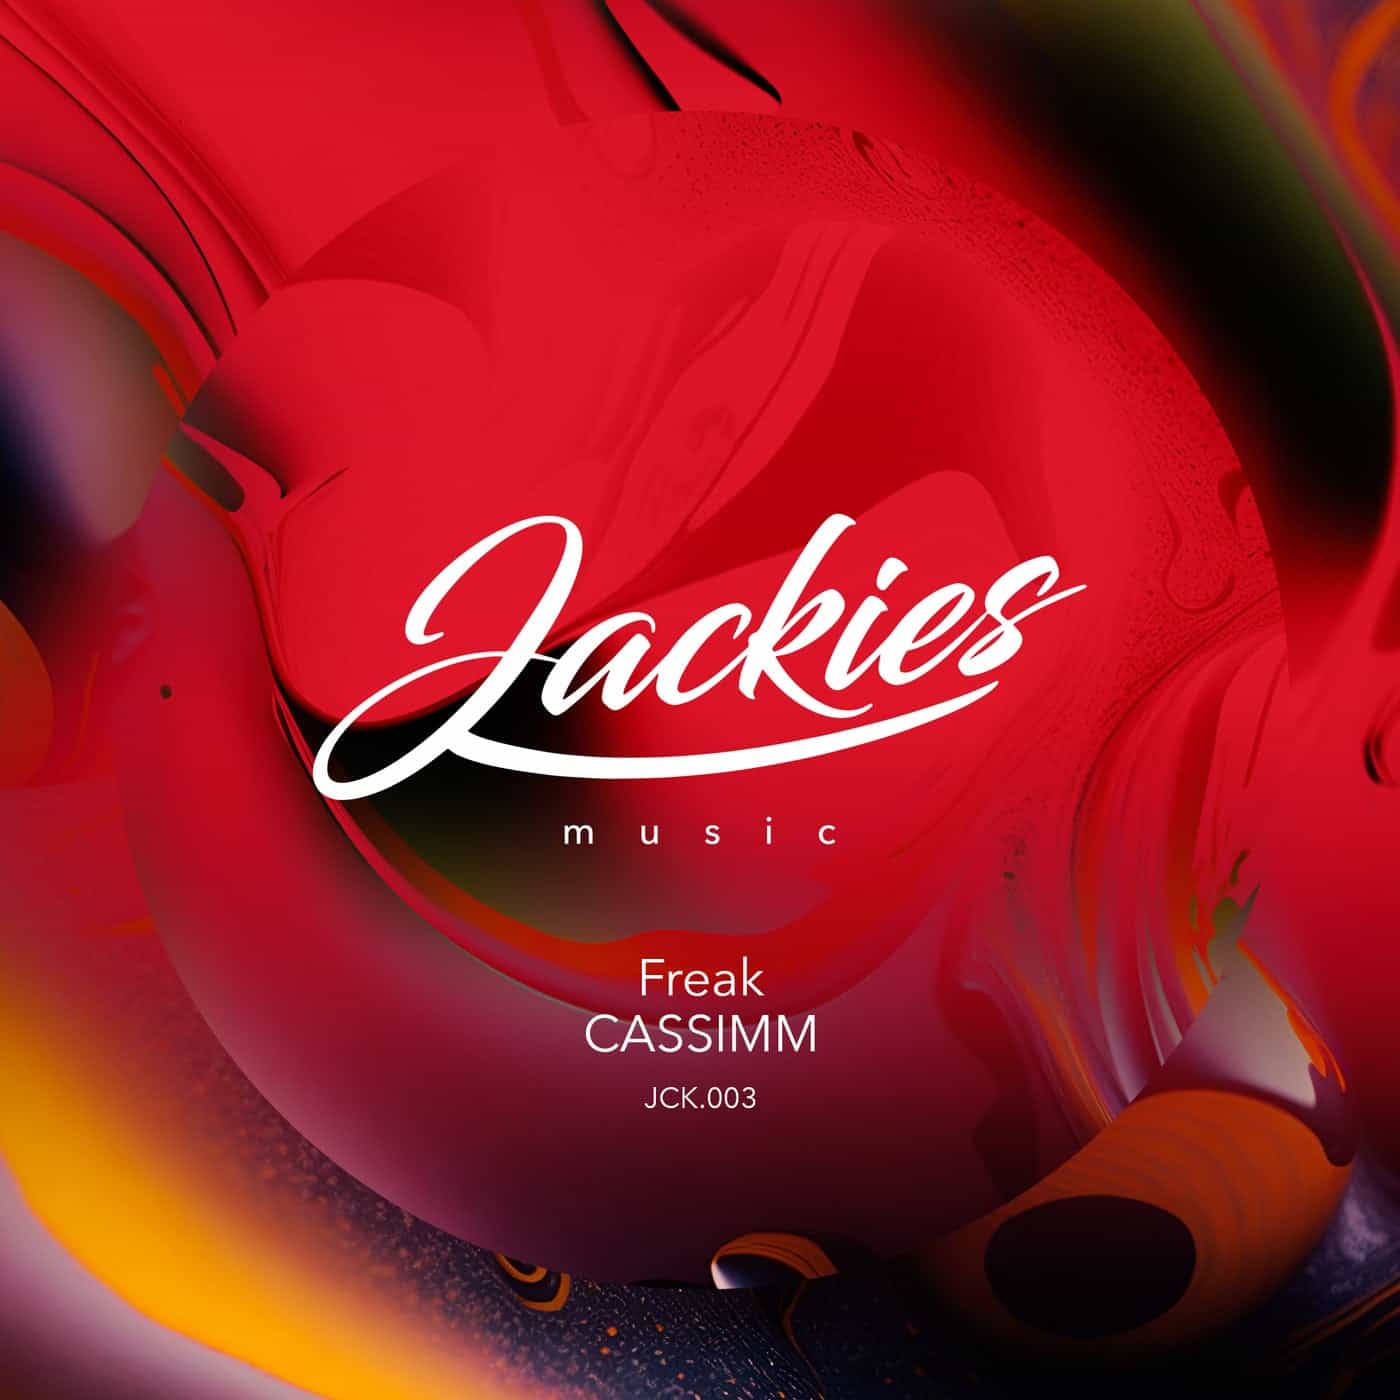 image cover: CASSIMM - Freak by Jackies Music Records